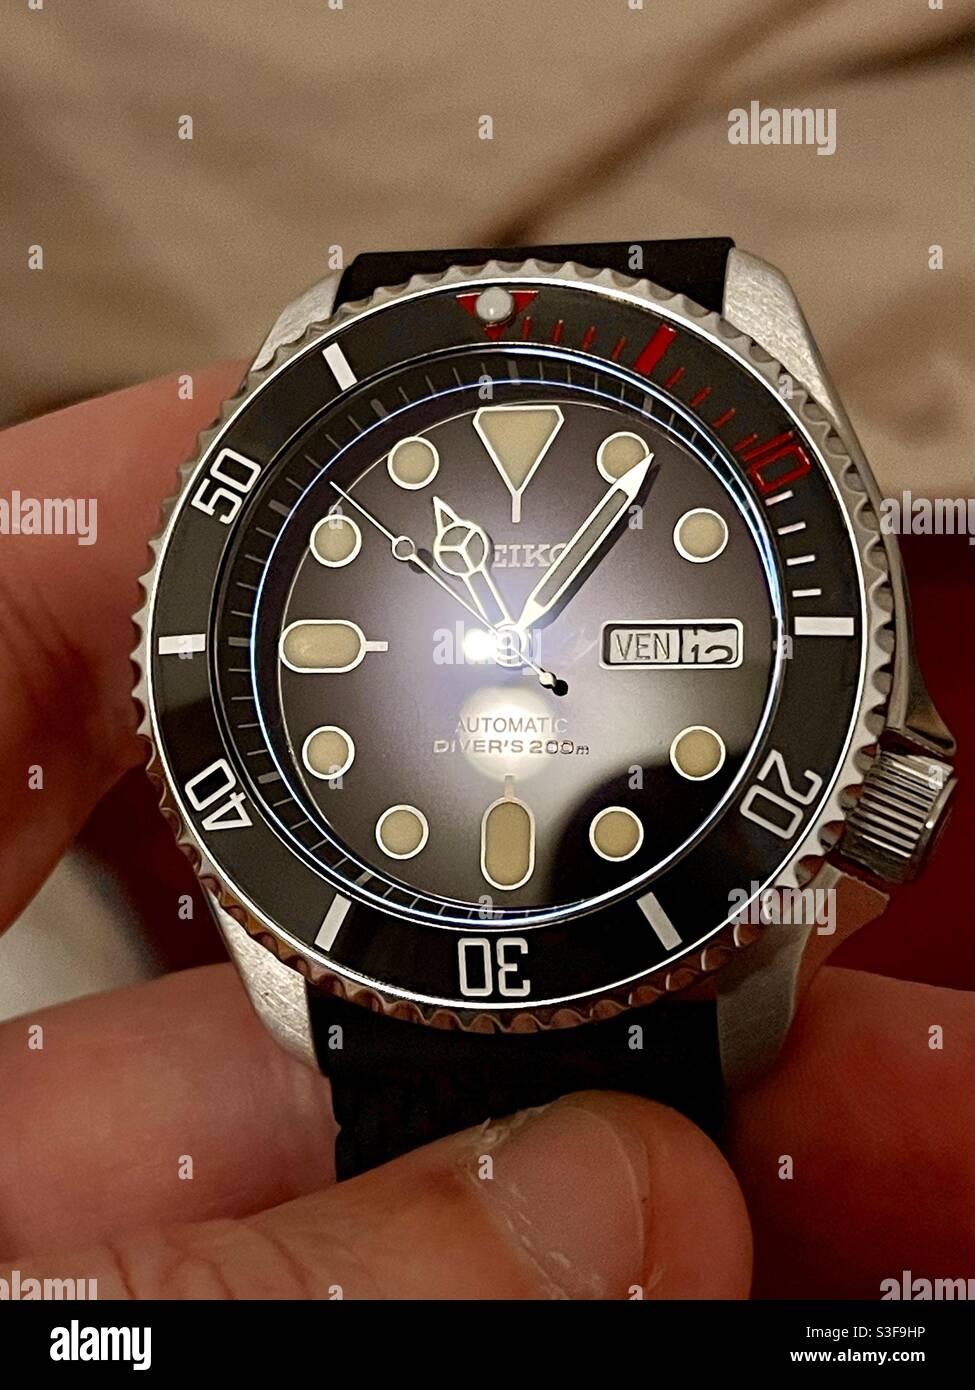 Seiko mod homage wrist watch in the Rolex Submariner or Omega Seamaster  style with blue dial, white hour markers, Mercedes hands and black bezel  with red accents Stock Photo - Alamy